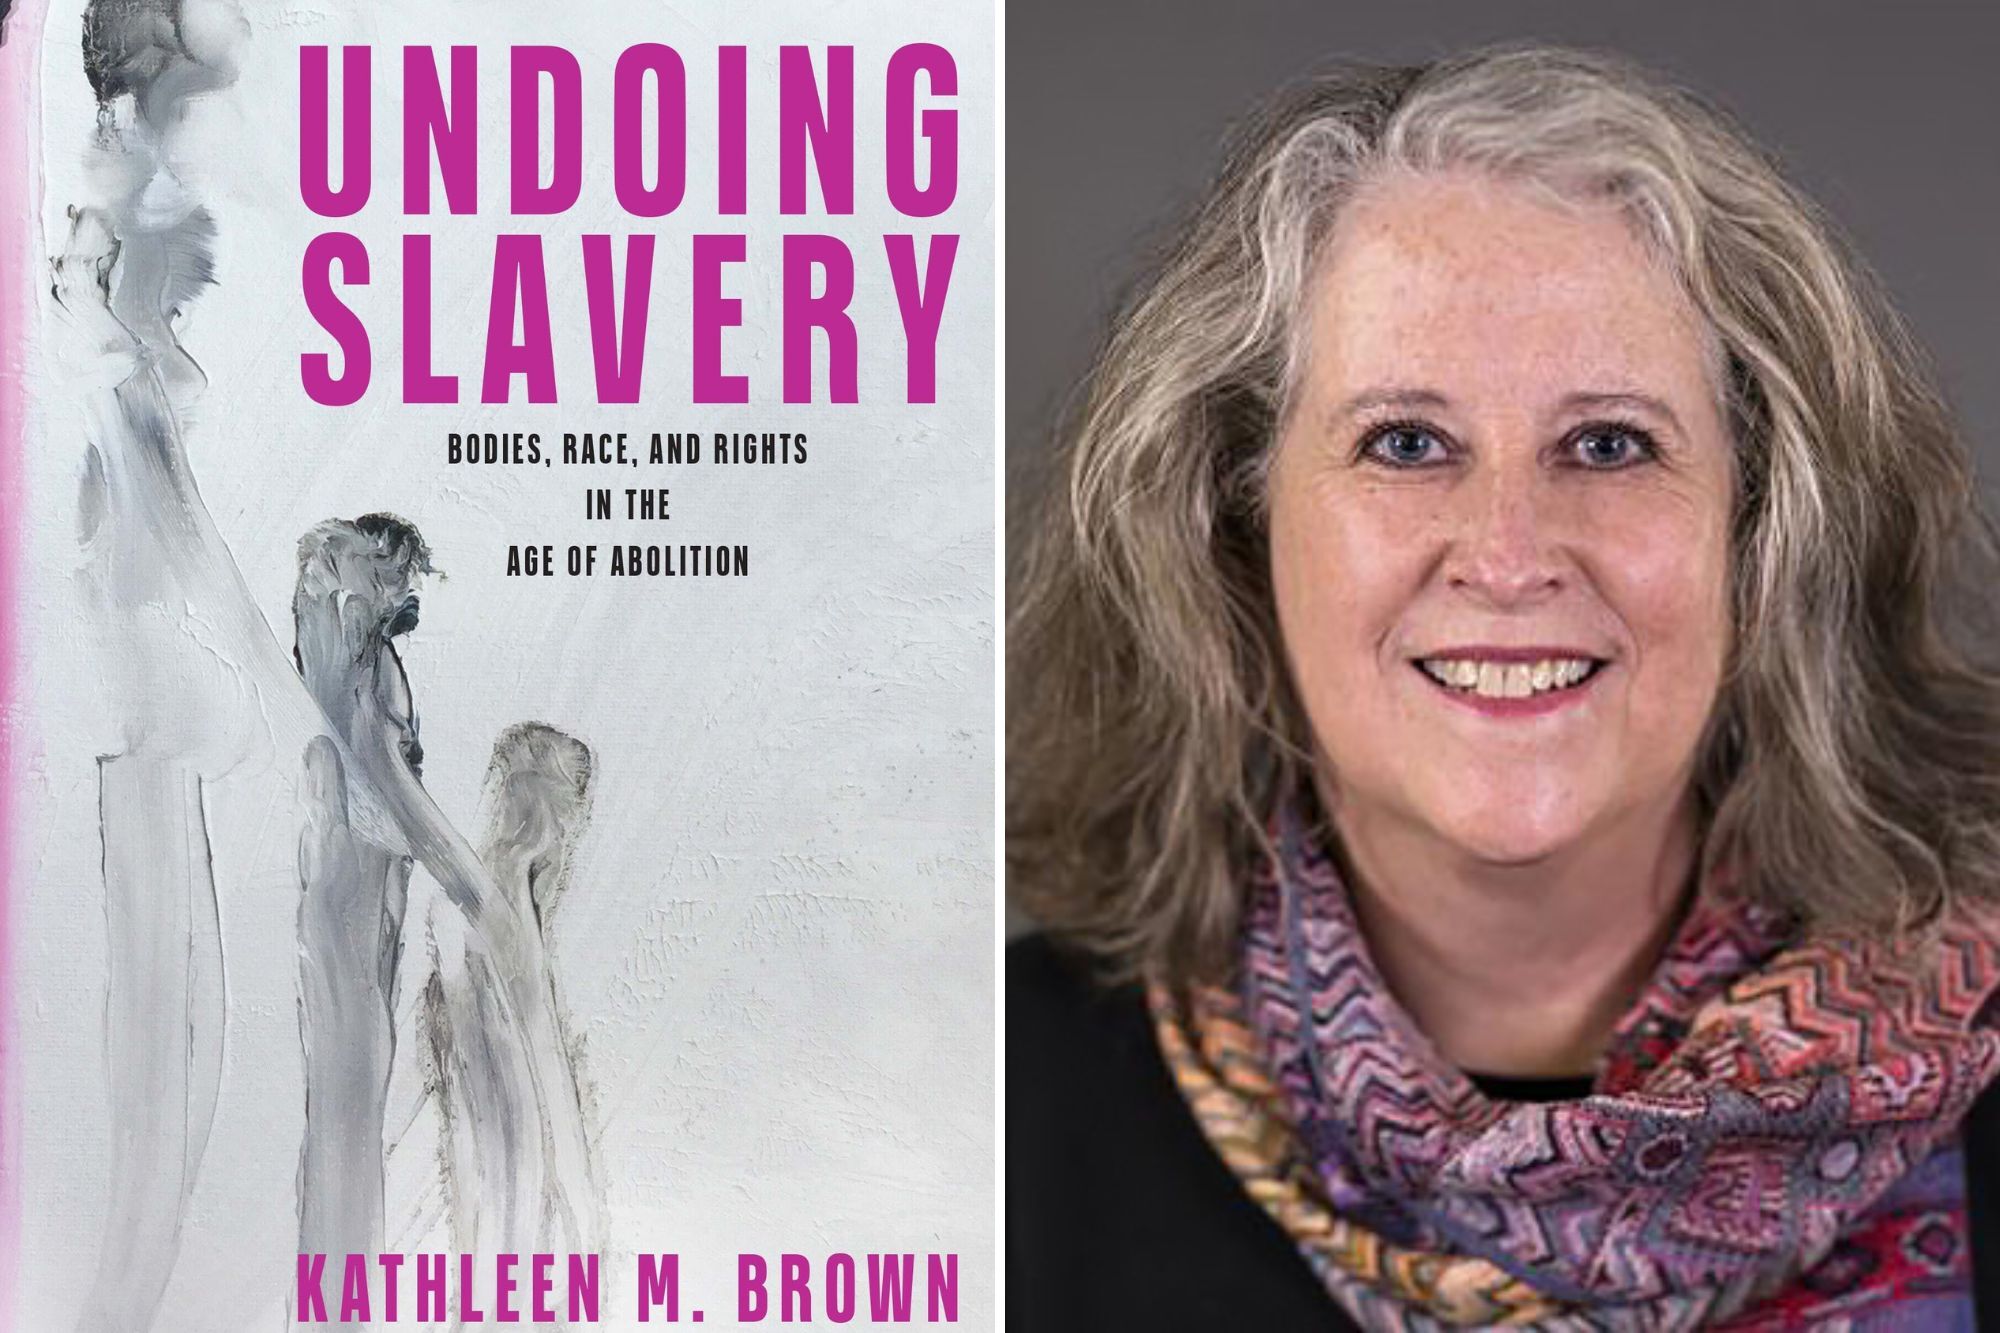 Left side of image shows a book cover reading "Undoing Slavery" and the right side of the image shows the author, Kathleen Brown.